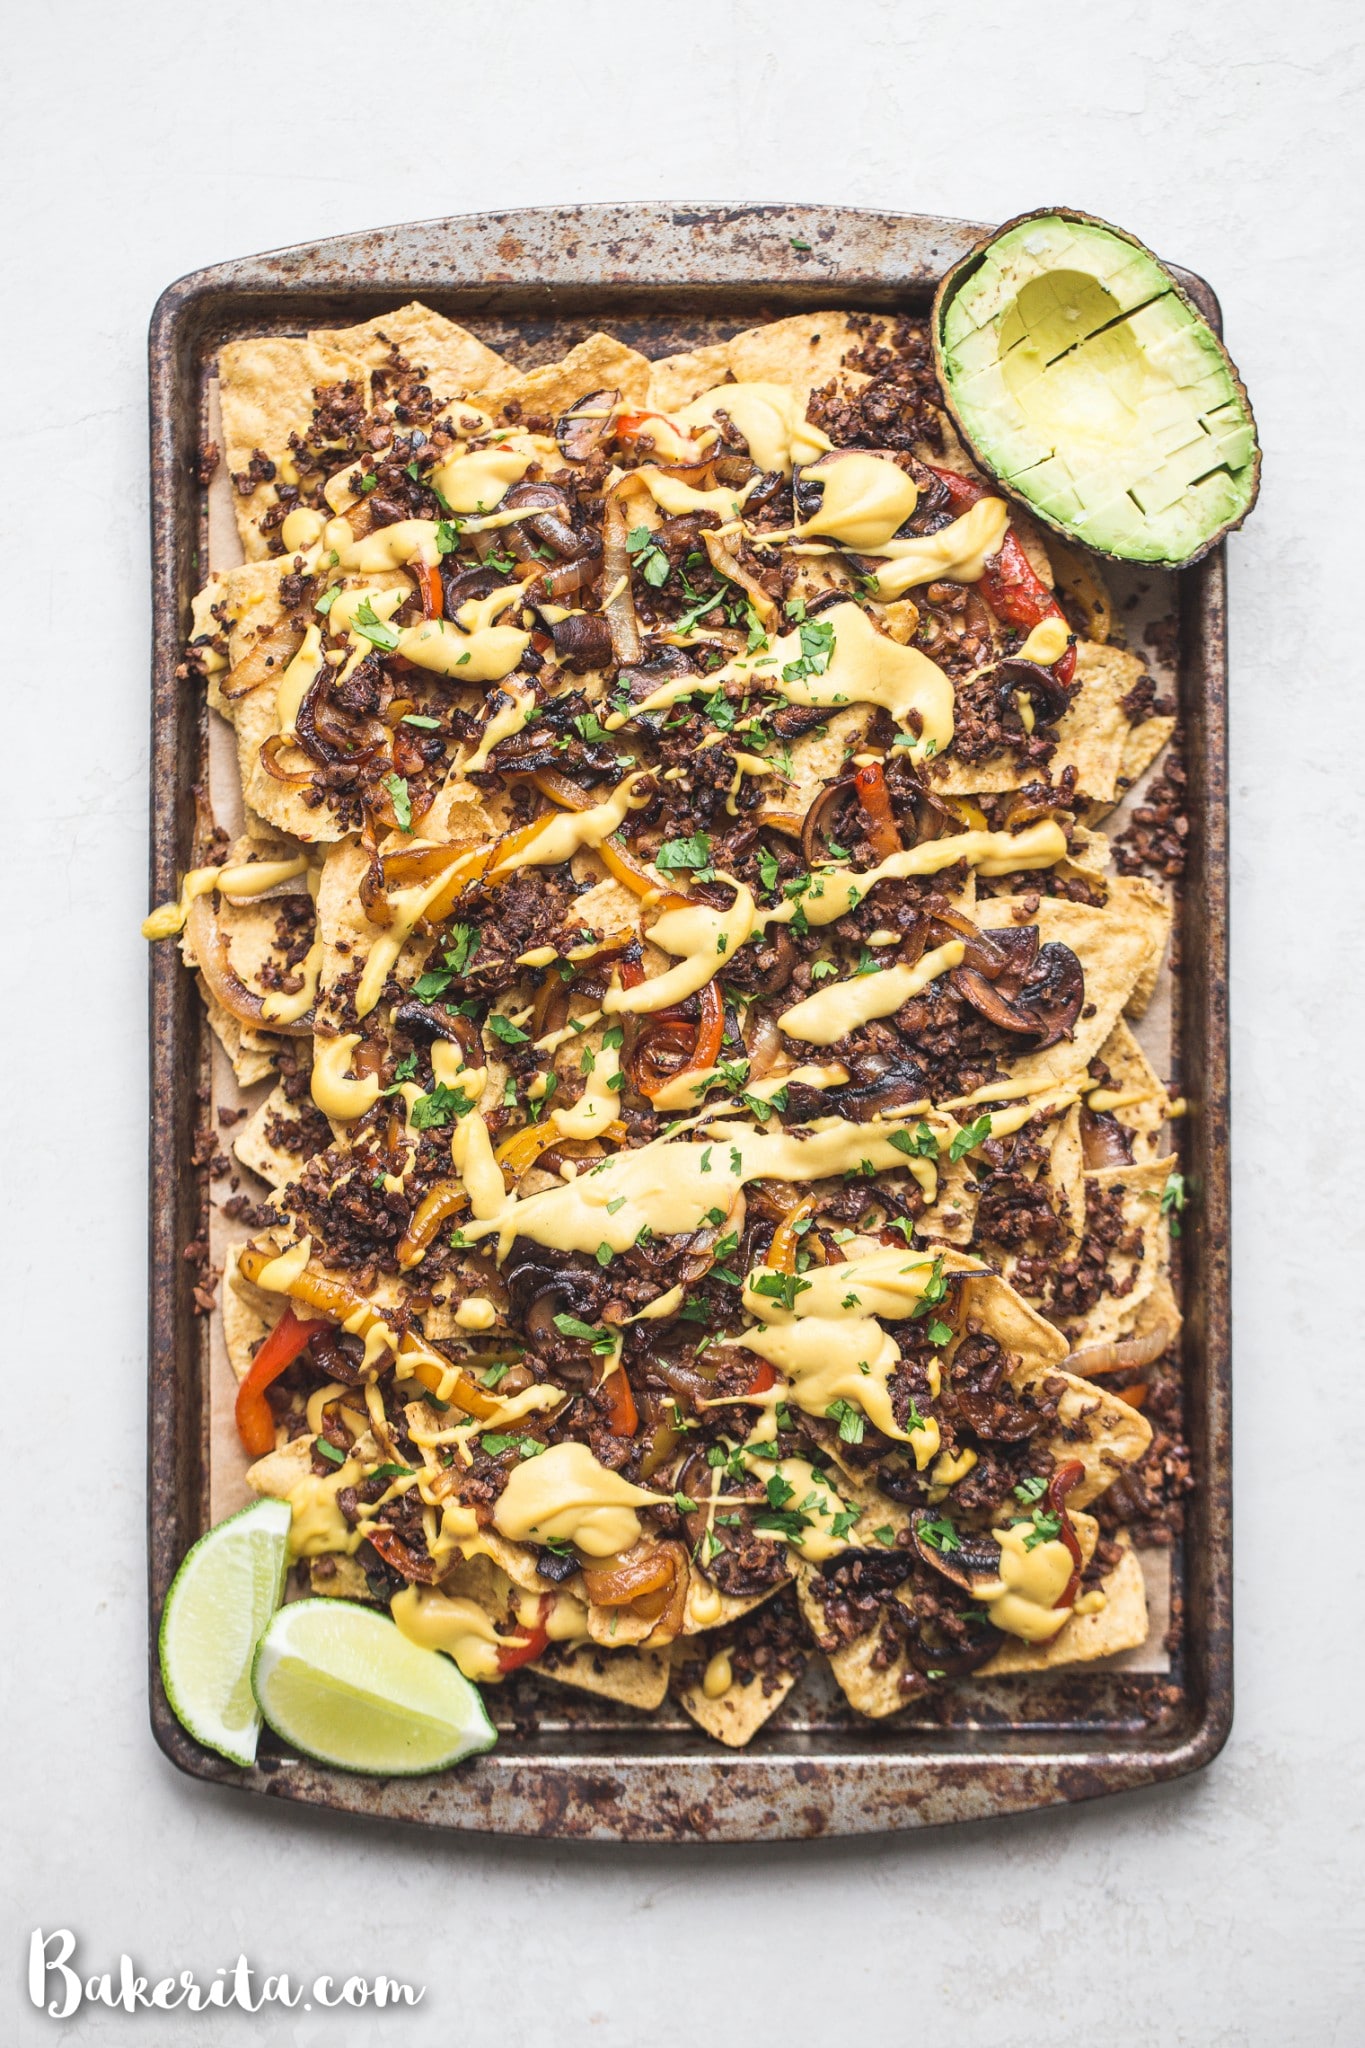 These are the BEST Vegan Nachos I've ever had! They're loaded with sauteed vegetables, vegan taco meat, pico de gallo, avocado, cilantro, and topped with a ton of vegan cheese sauce. They're the perfect cheesy snack for game day.